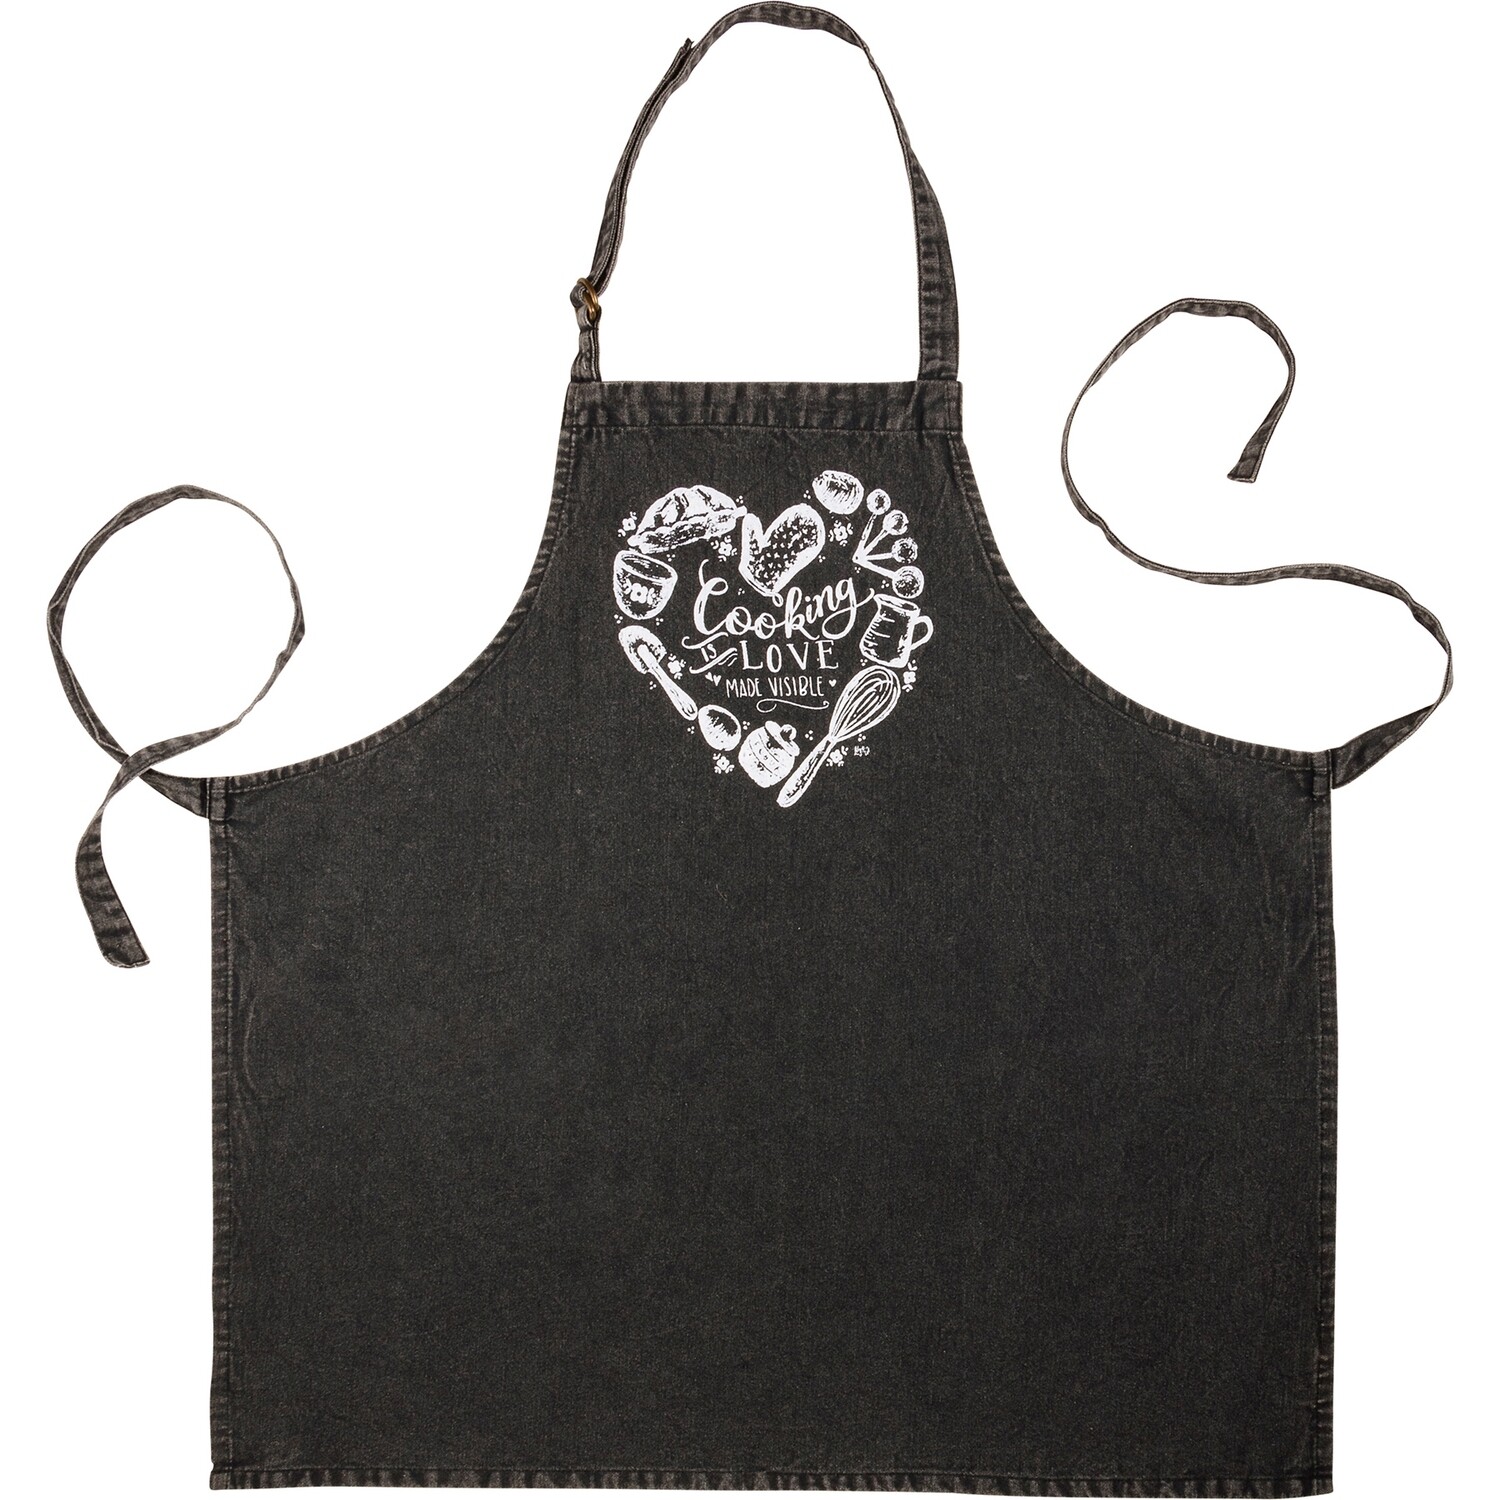 Cooking is Love Apron